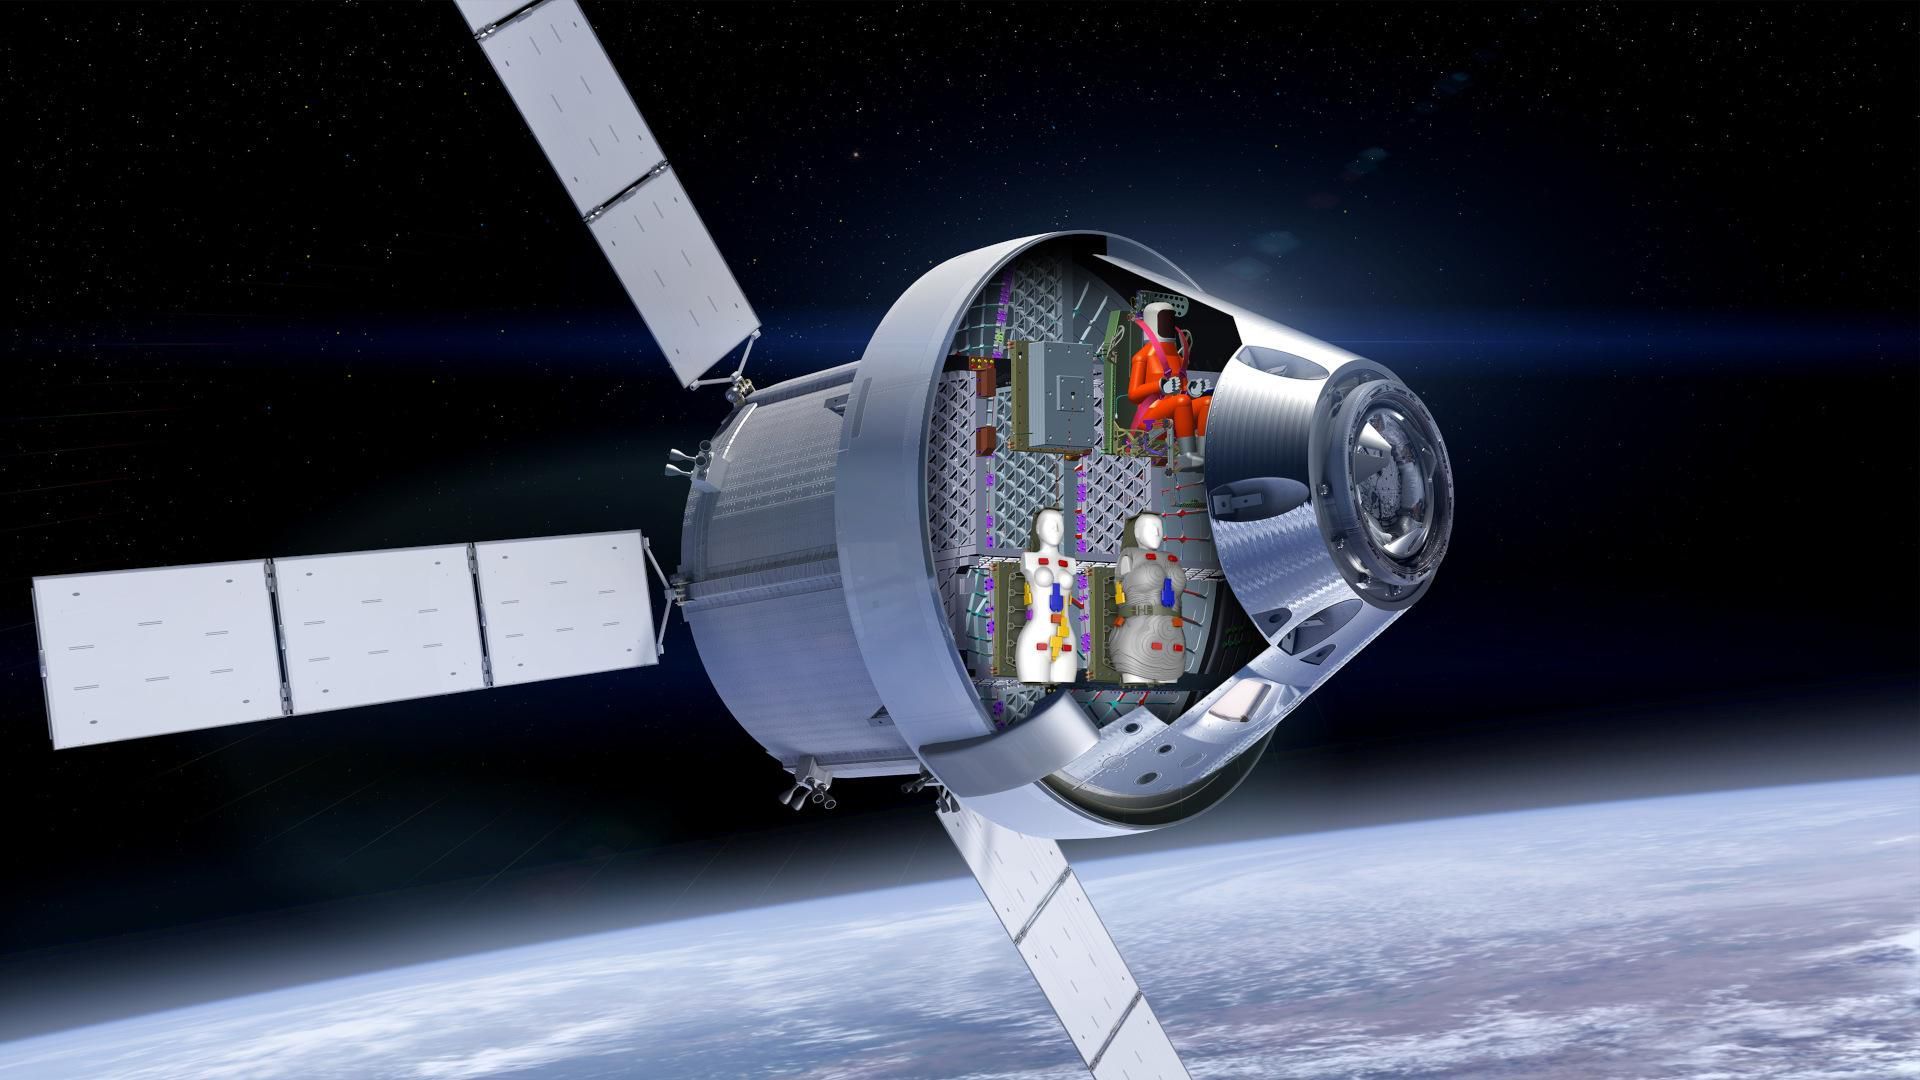 Illustration of the "crew" of the Artemis 1 mis­sion to the moon. Image courtesy of NASA/Lockheed Martin/DLR